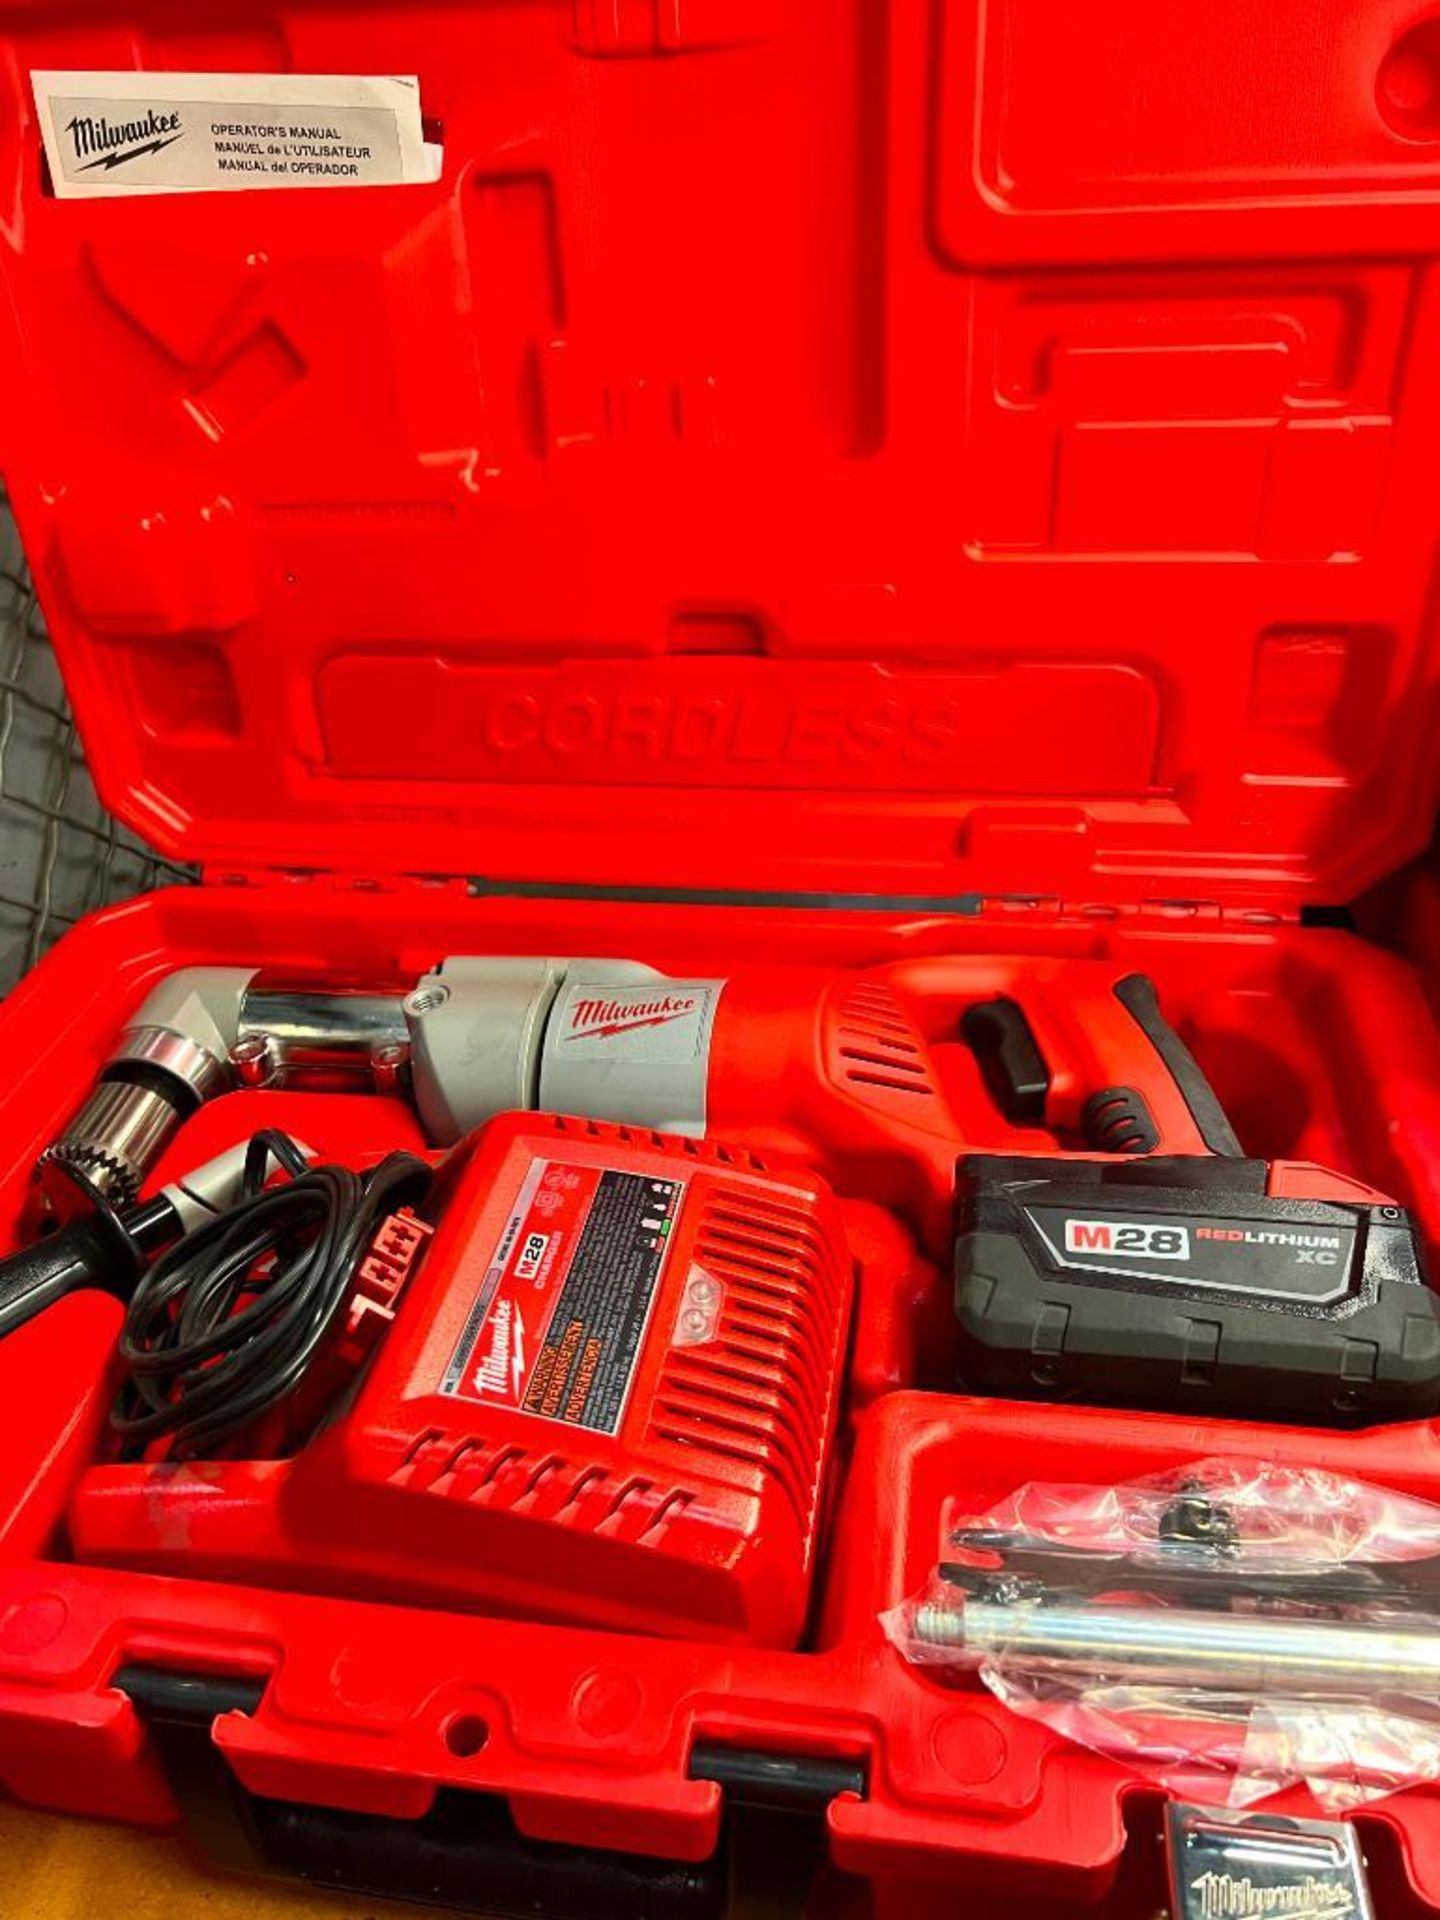 Milwaukee 28 V 1/2" Right Angle Drill, S/N A73BD163500373, w/ Battery & Charger